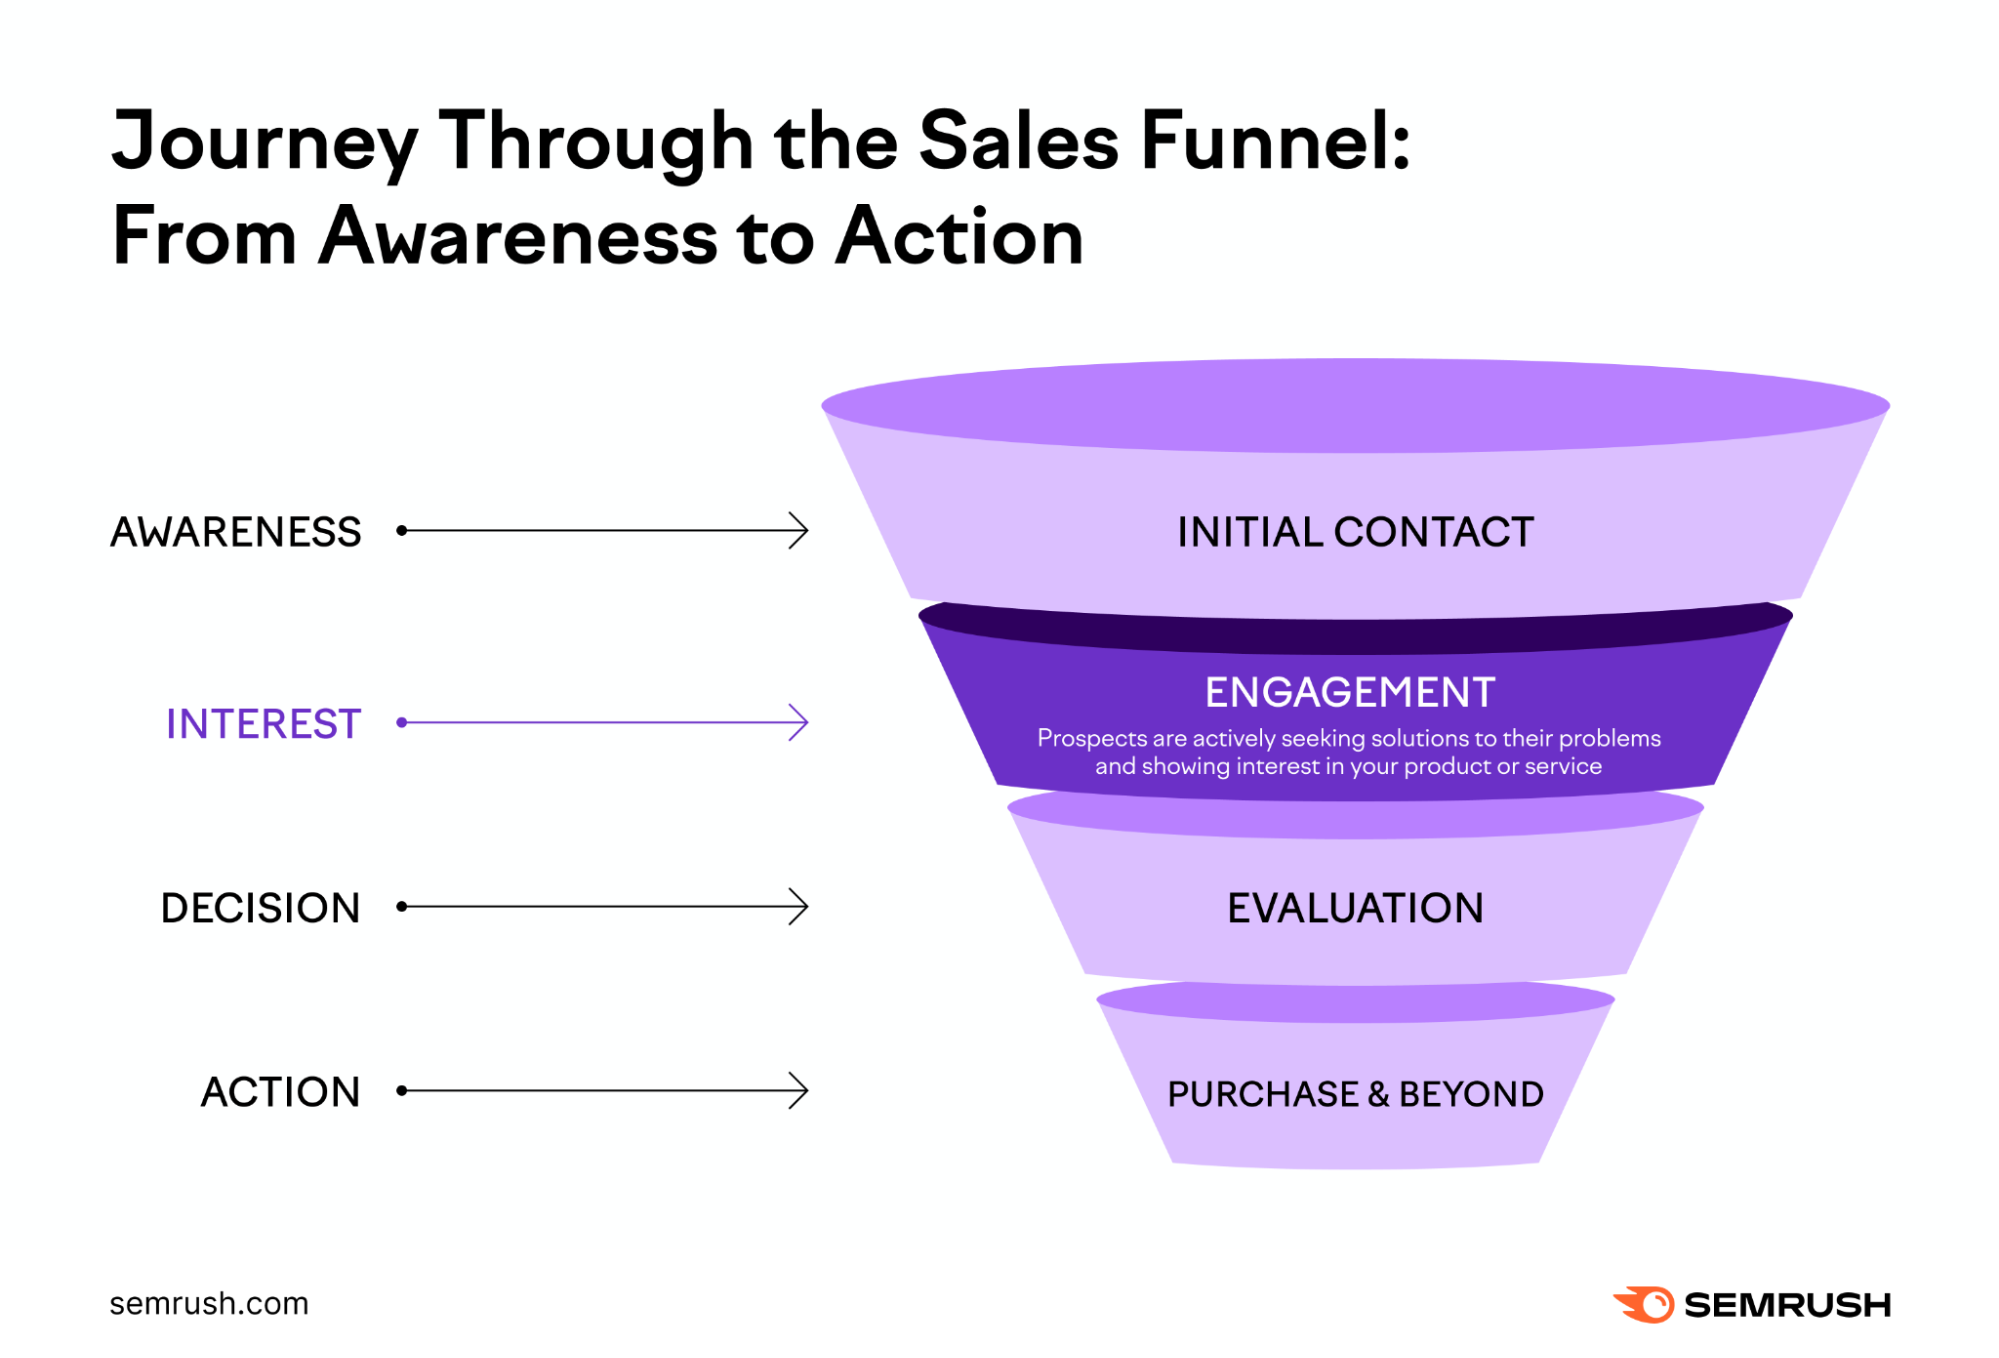 An infographic showing a sales funnel: from awareness to action, with "interest" highlighted